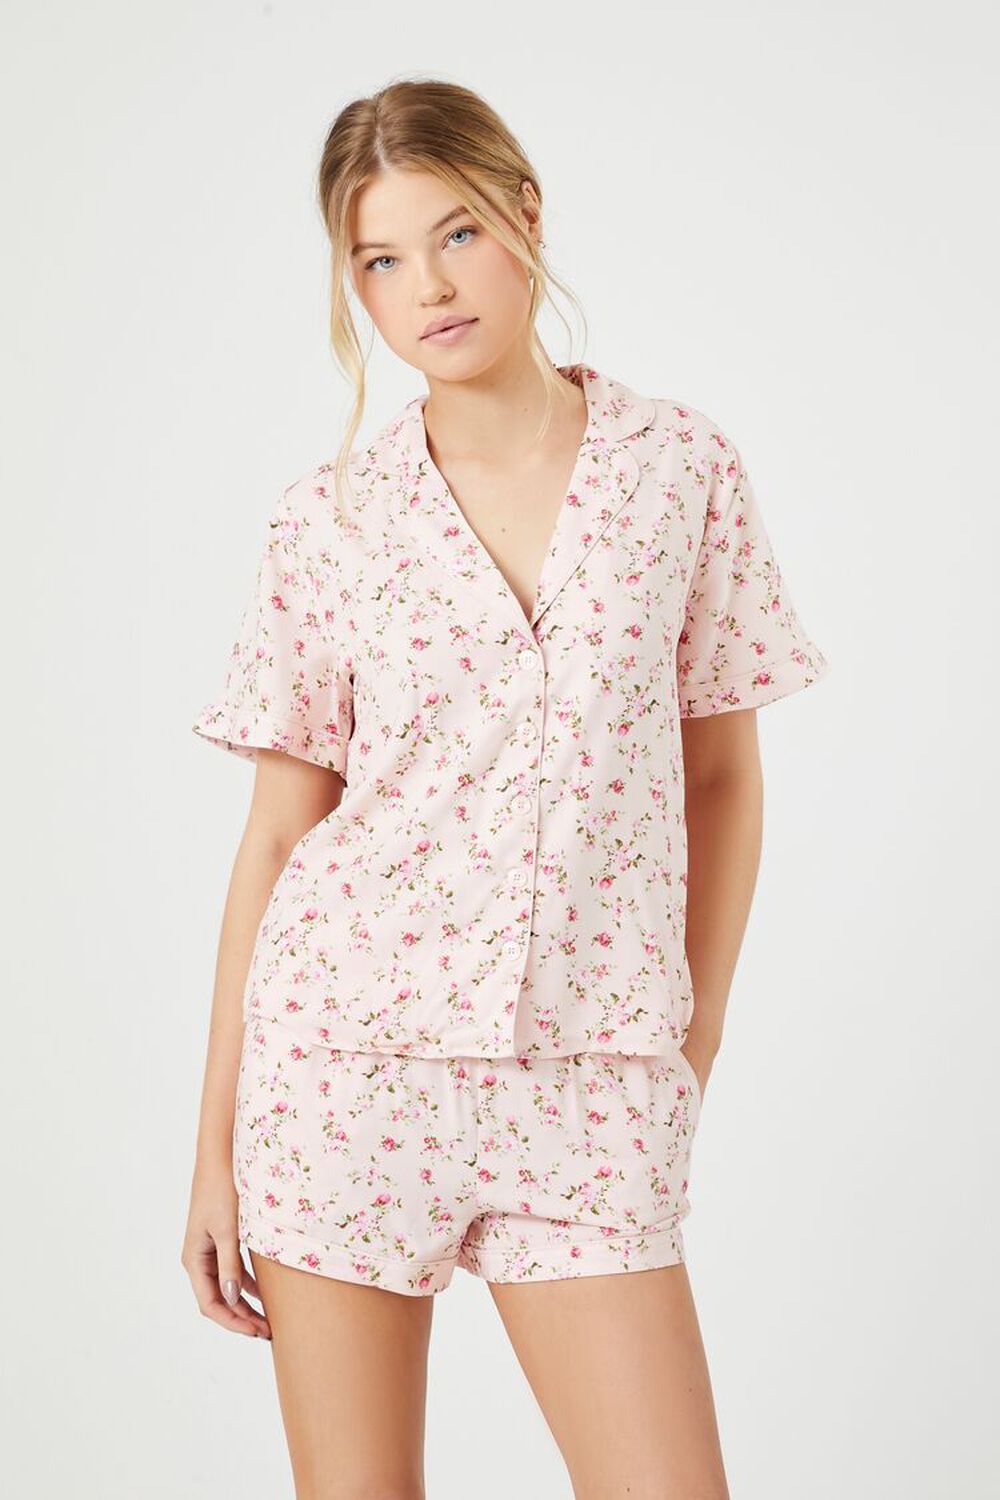  Flower Florals Modal Soft Pajama Shorts for Women